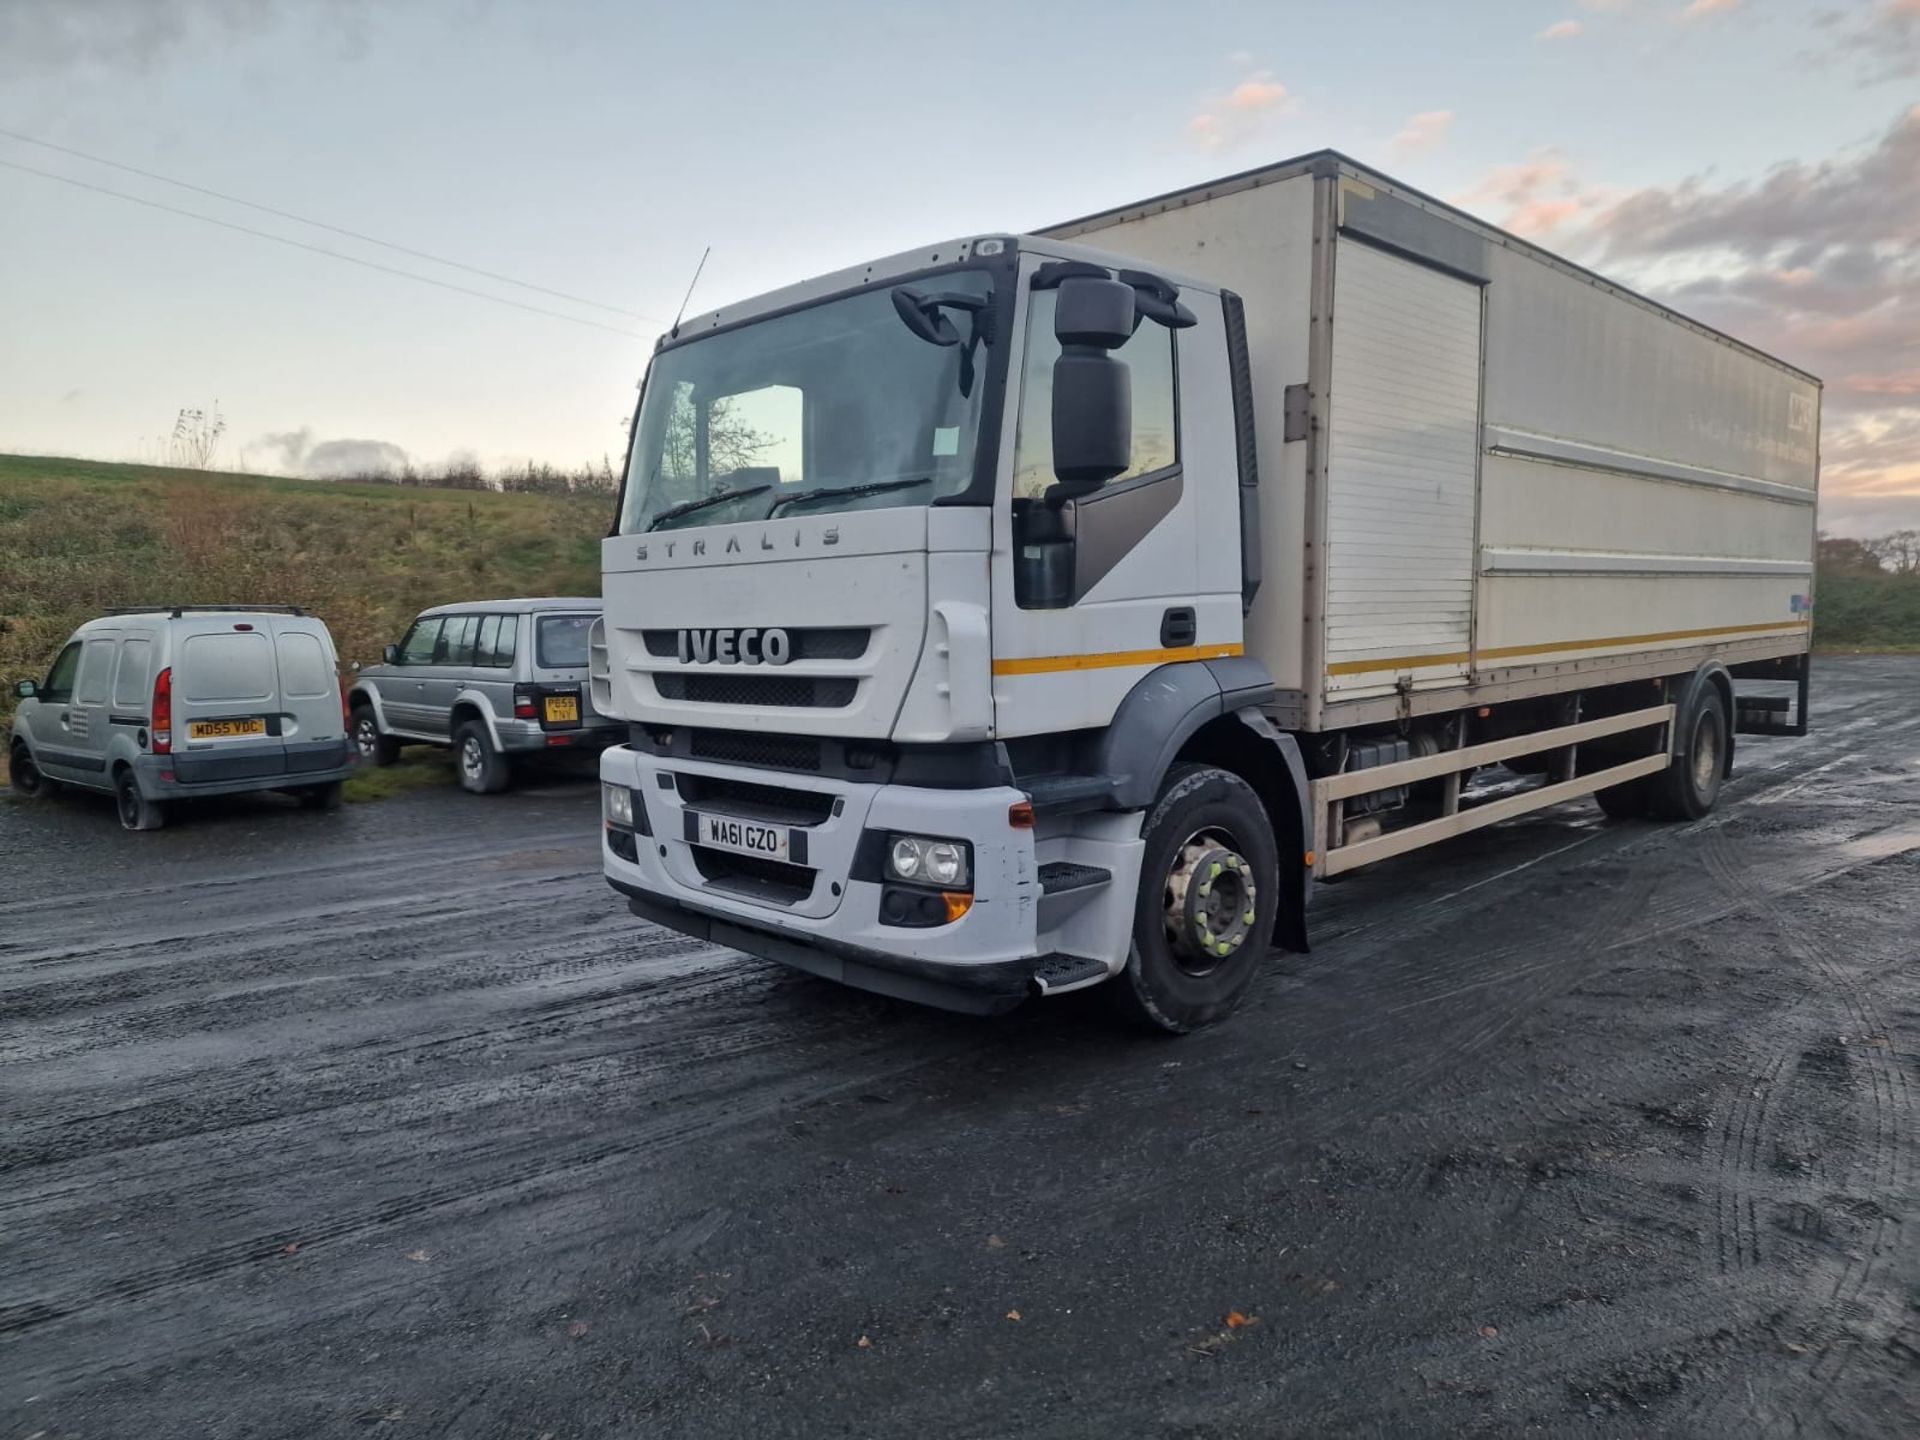 11/61 IVECO STRALIS - 7790cc 2dr Lorry (White) - Image 2 of 9